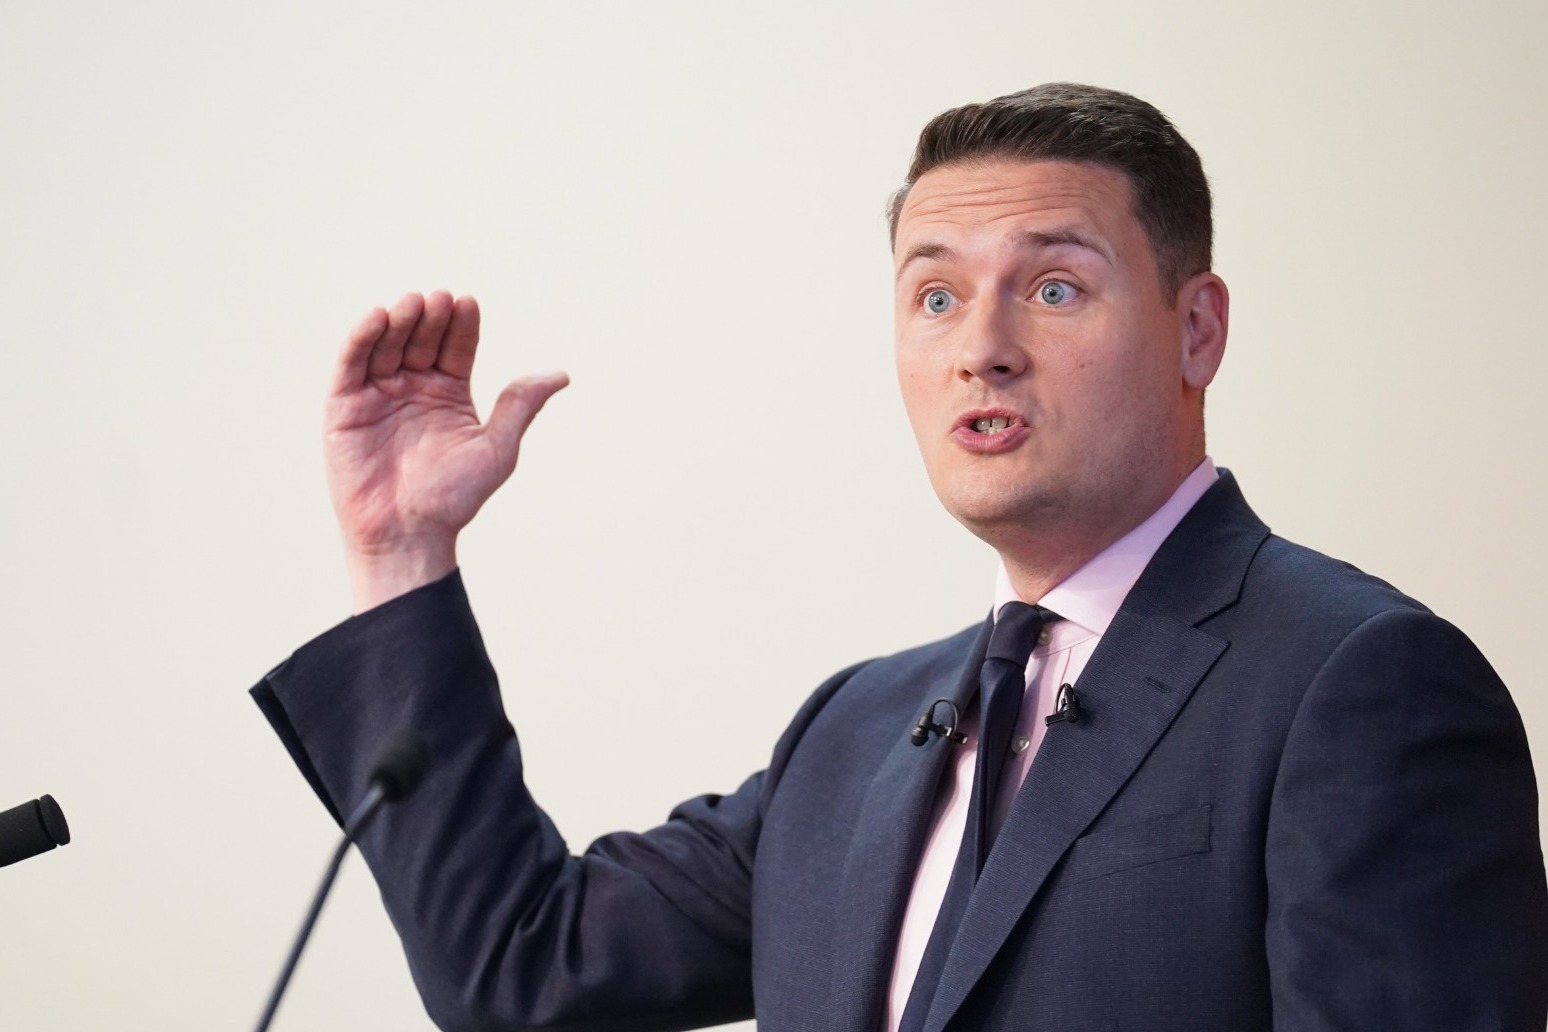 Labour would resolve dangers of ‘outdated’ NHS equipment – Wes Streeting 